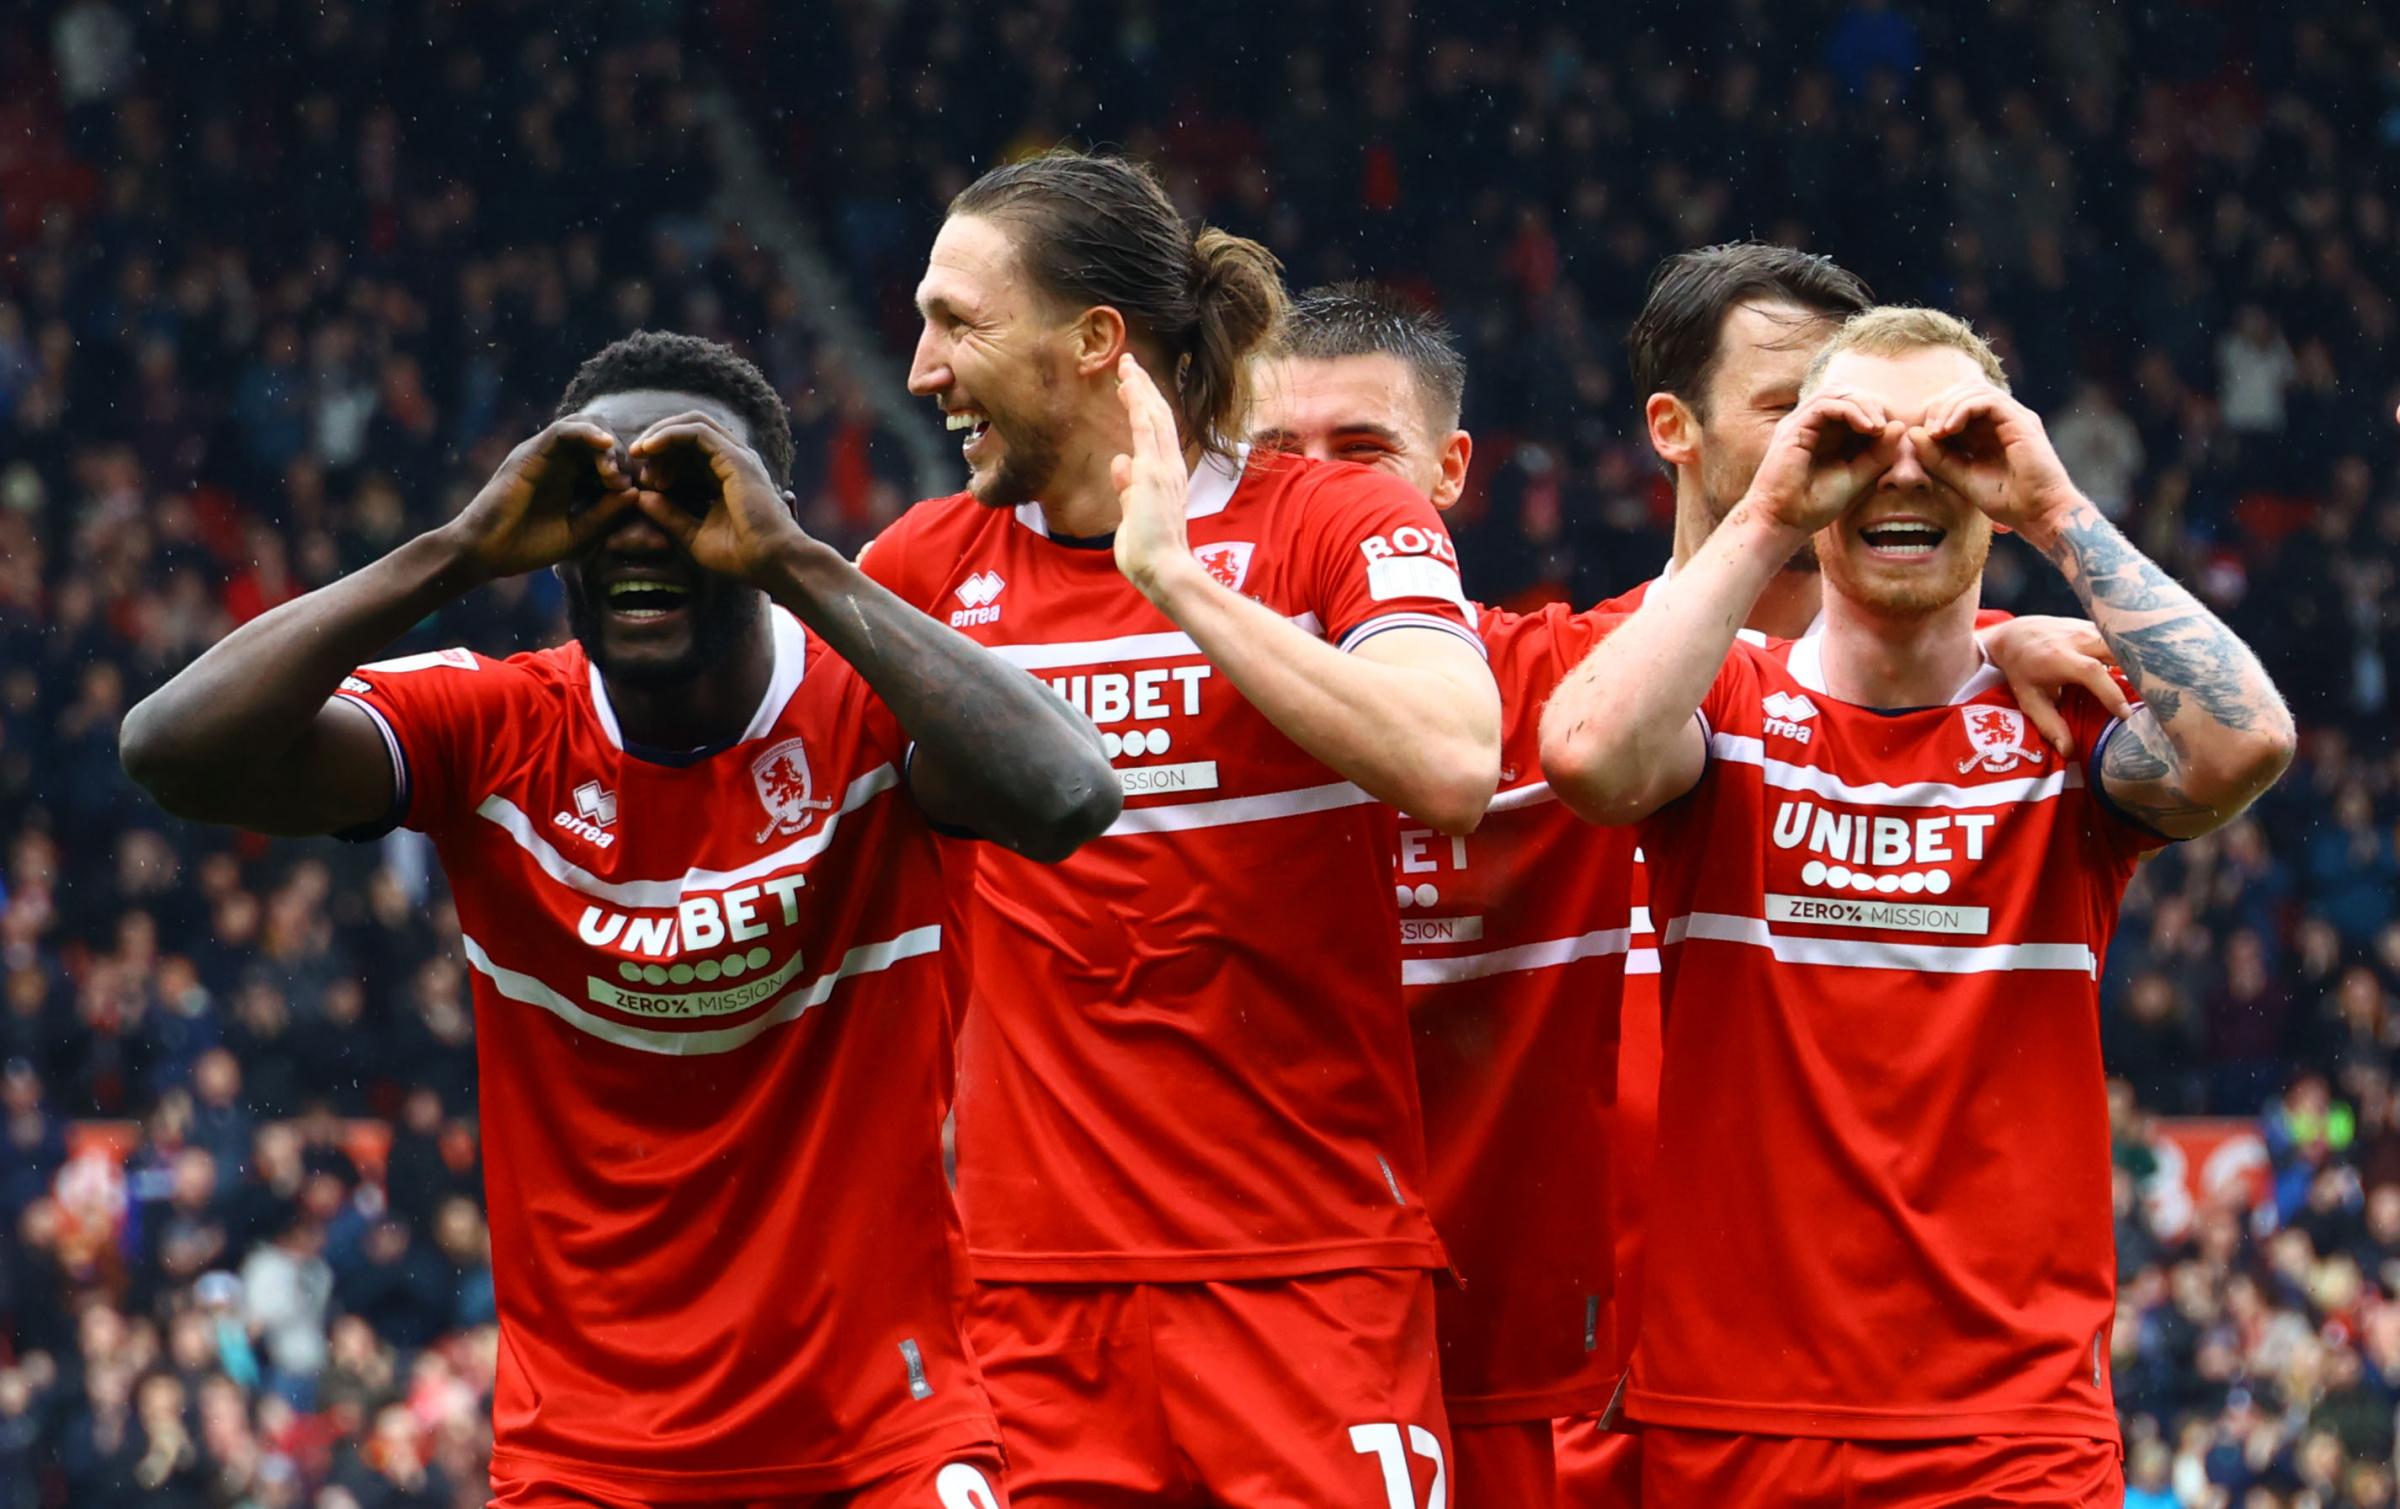 Middlesbrough 2 Sheff Wed 0: Boro within six points of play-offs